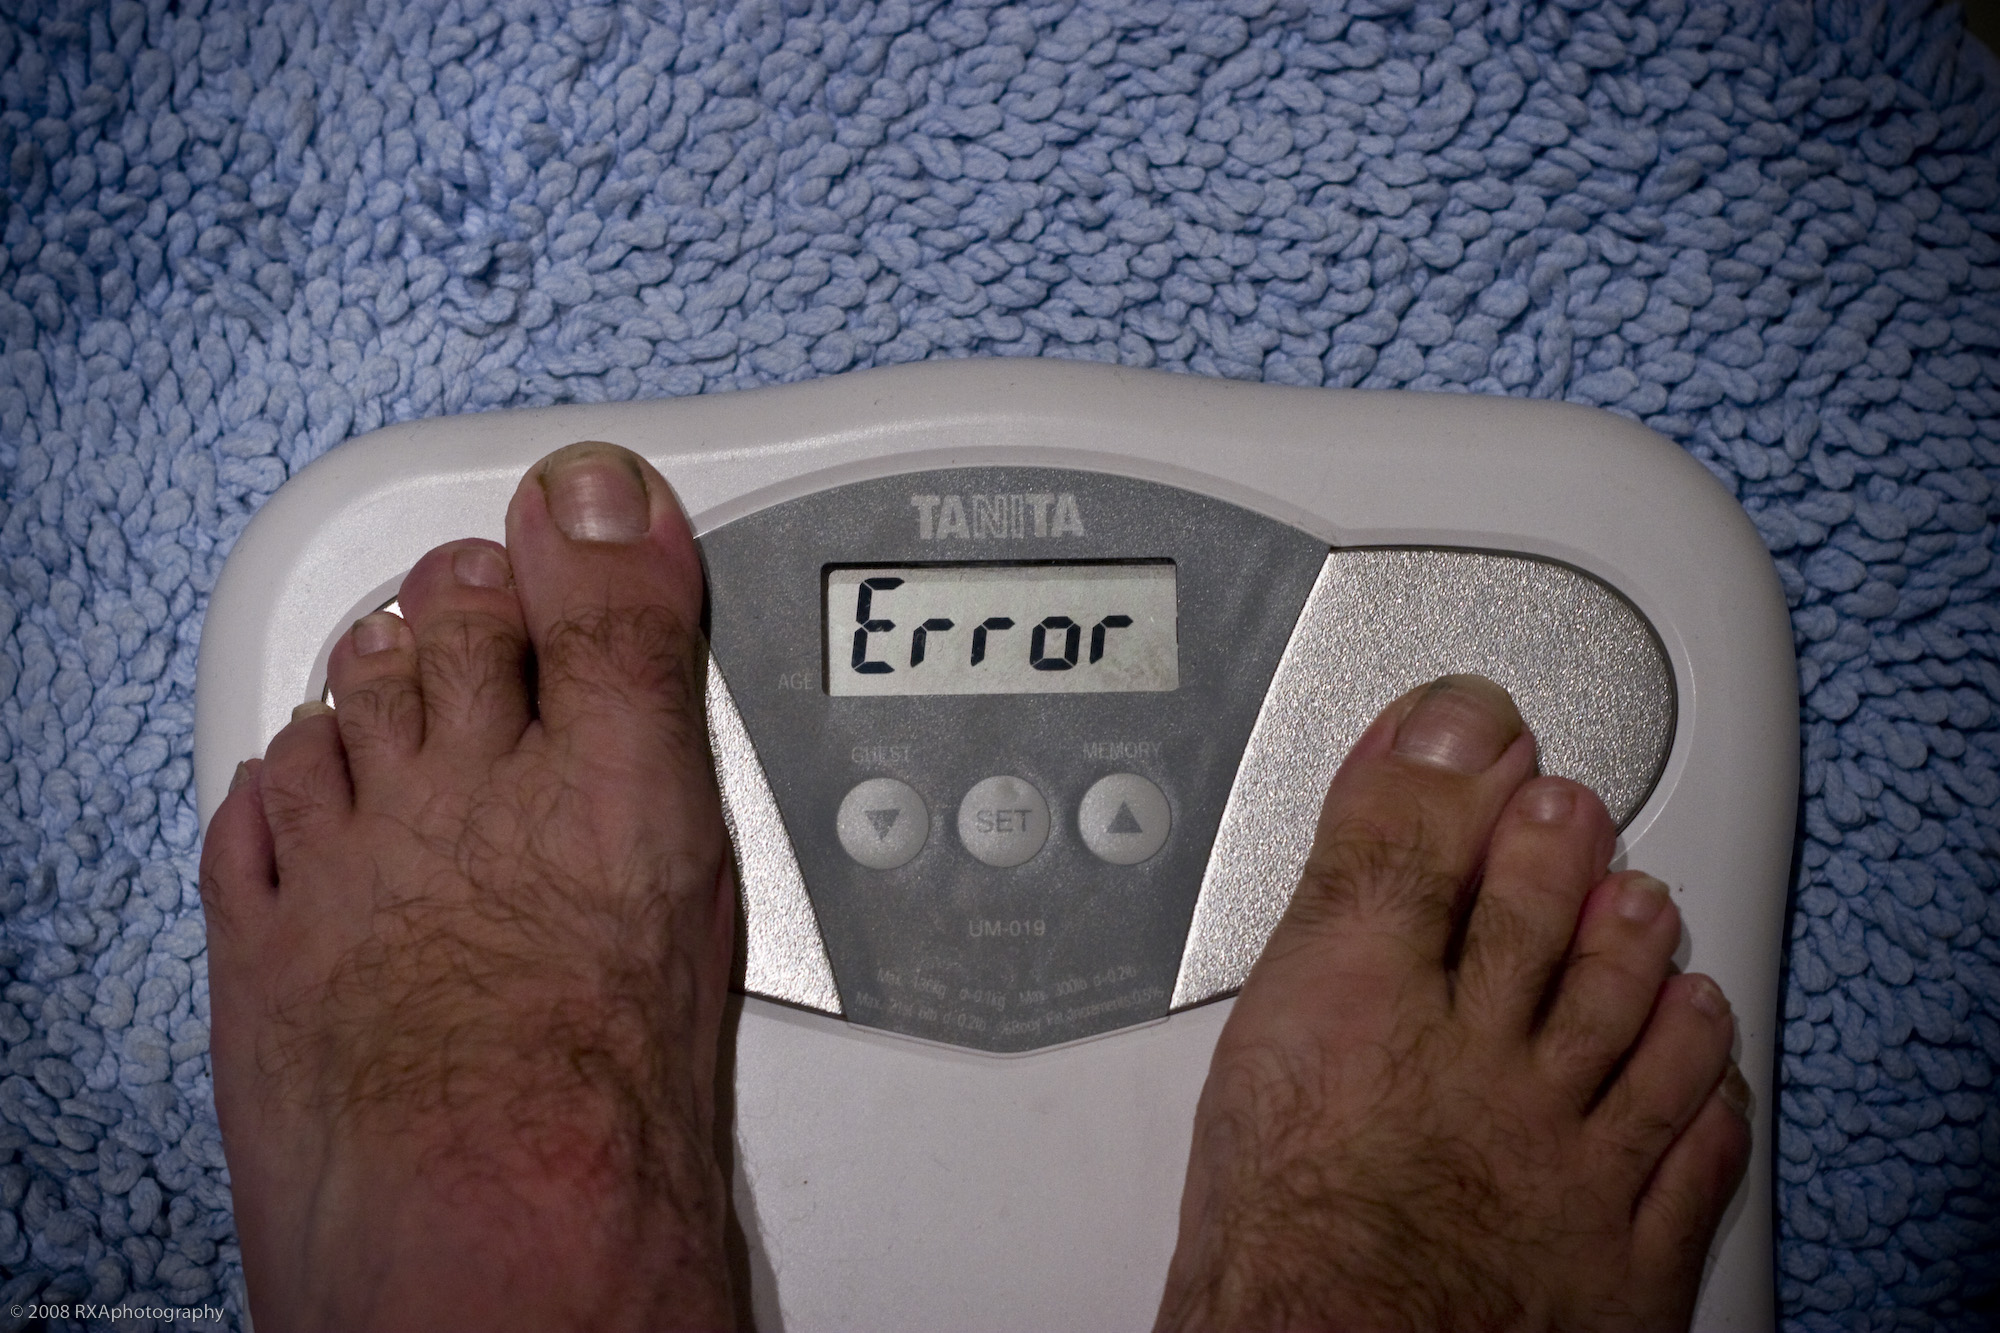 Heavy Duty Weight Scales For Obese People Up To 1000 Lbs